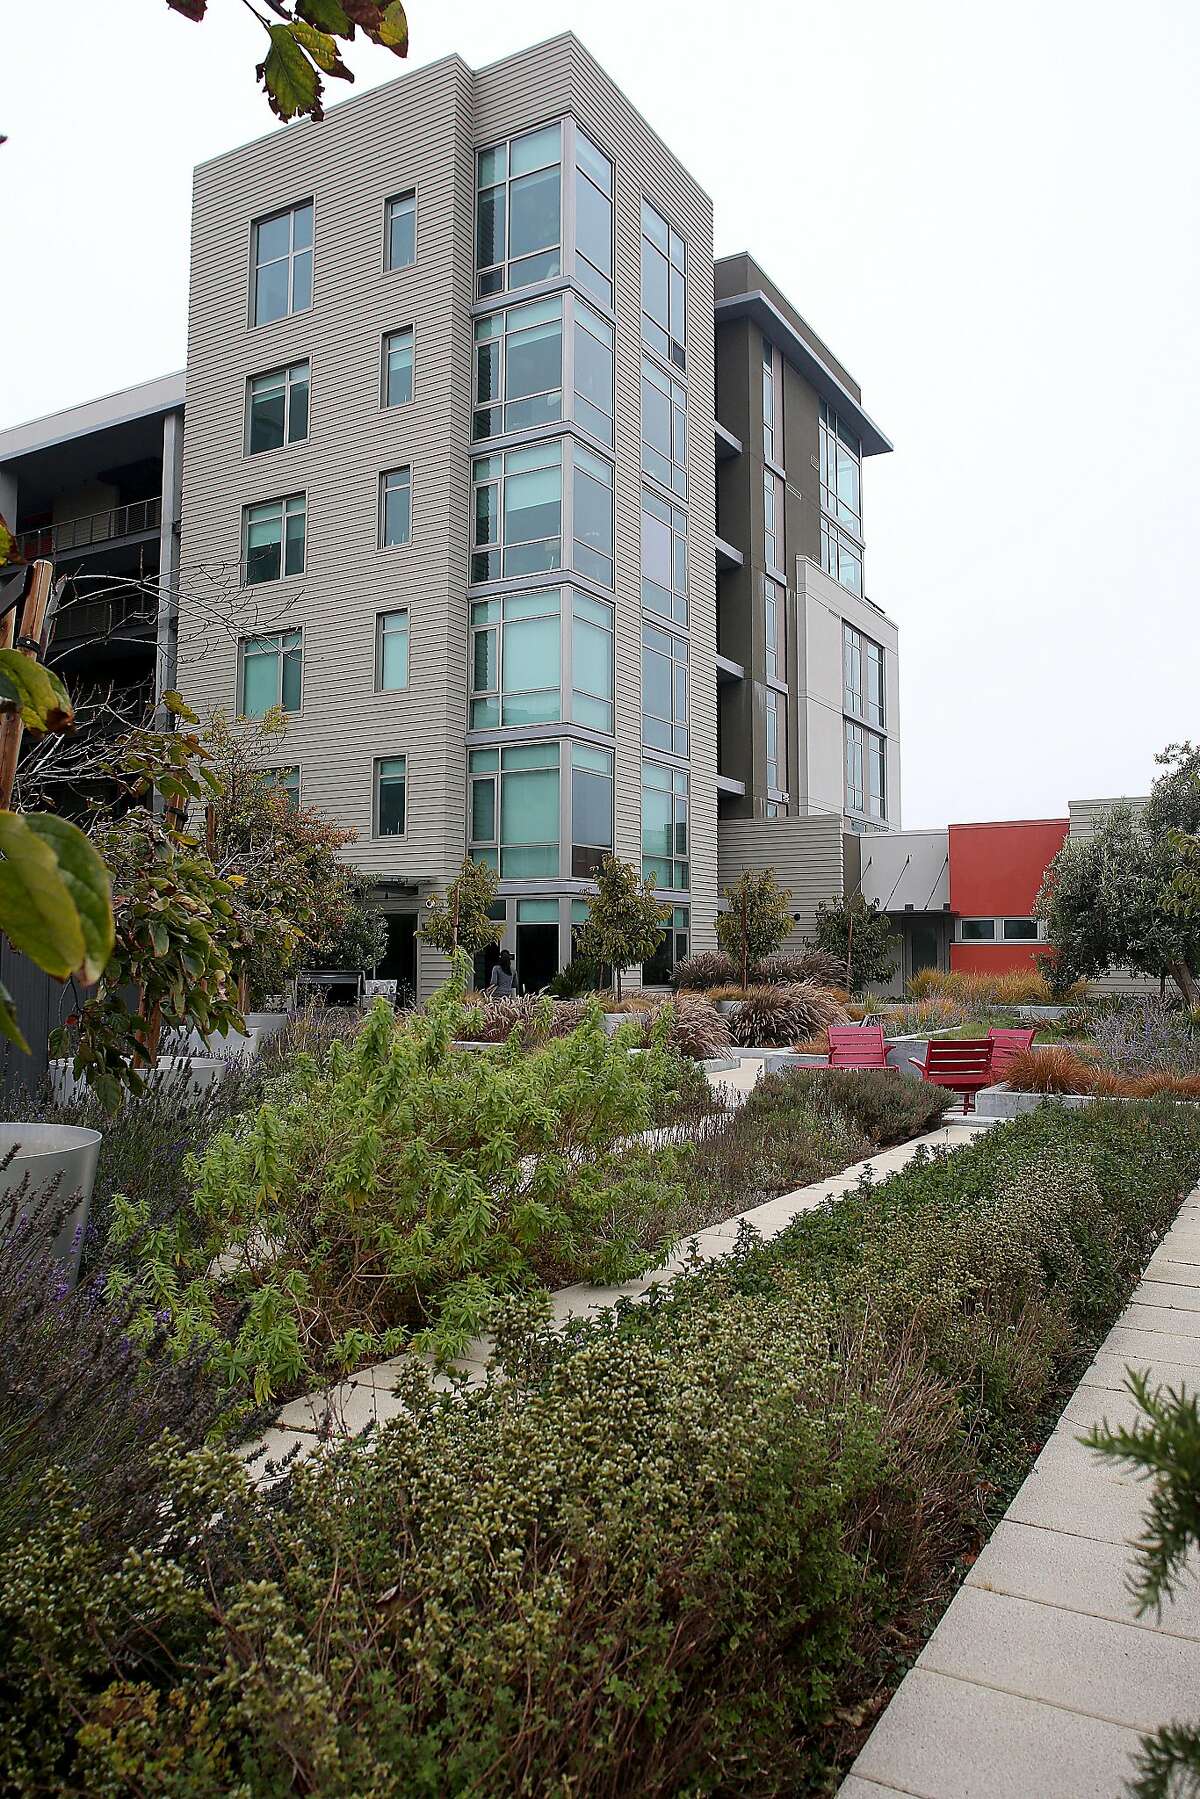 A view of the herb rooftop garden with oregano in the foreground at 38 Dolores St. on Thursday, September 1, 2016, in San Francisco, Calif.